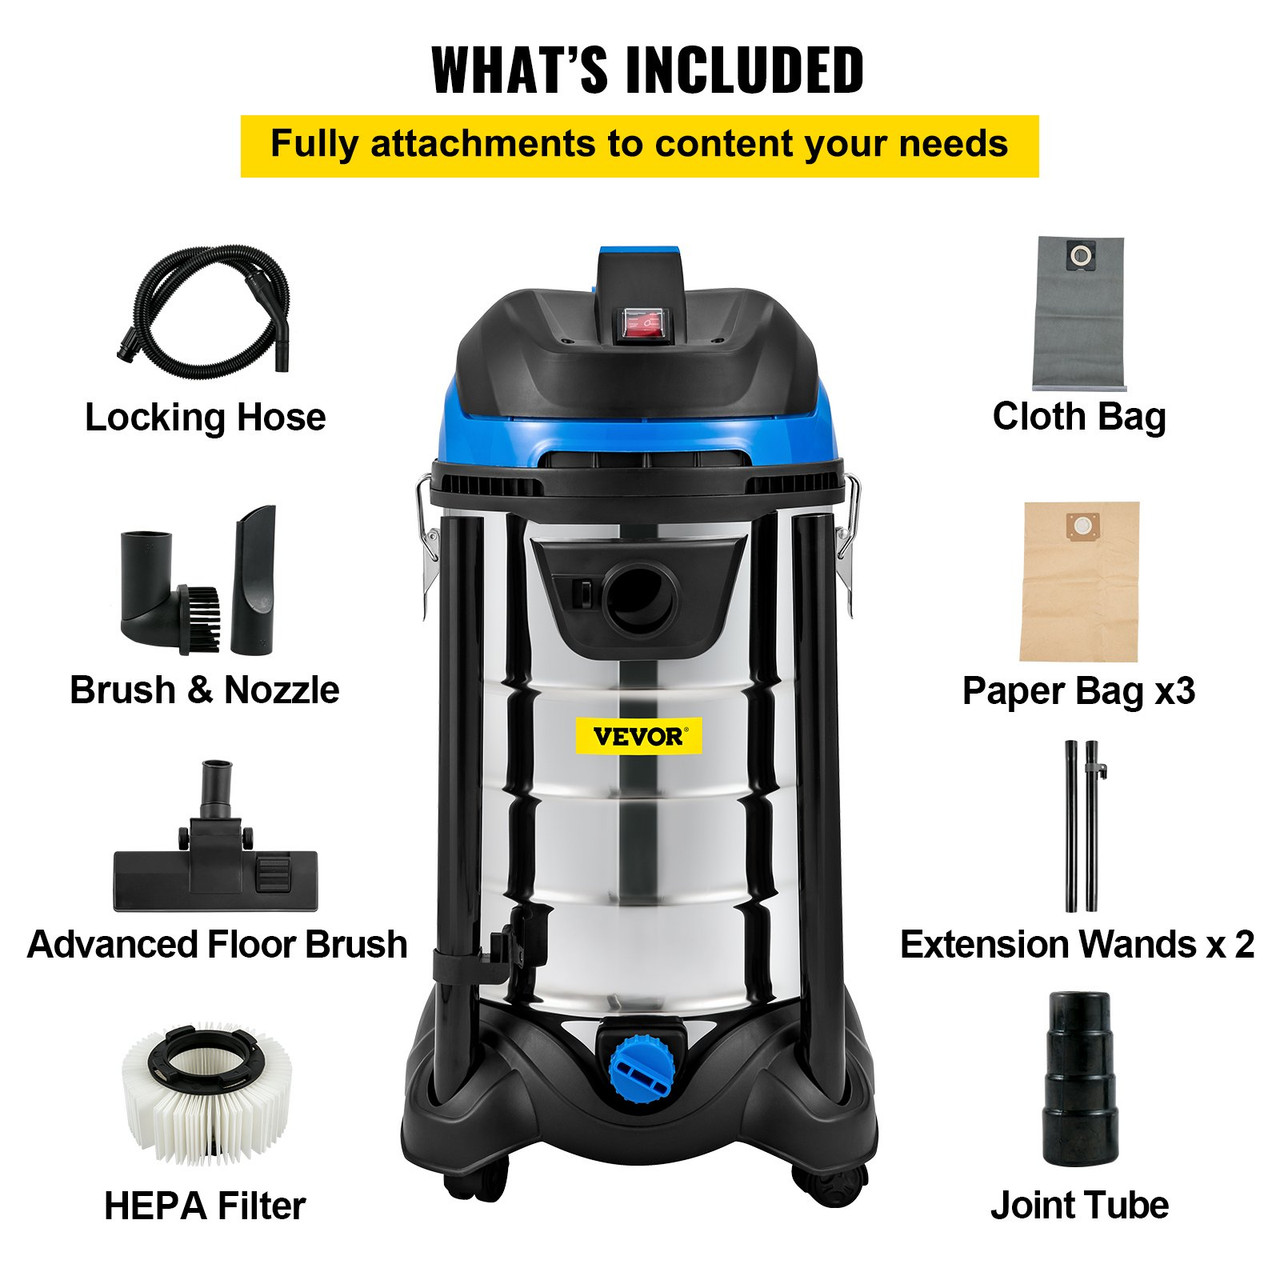 Dust Extractor, 8 Gallon Wet & Dry HEPA Filter, Automatic Dust Cleaning, 1200W Powerful Motor Vacuum Cleaner,Heavy-Duty Shop Vacuum with Attachments